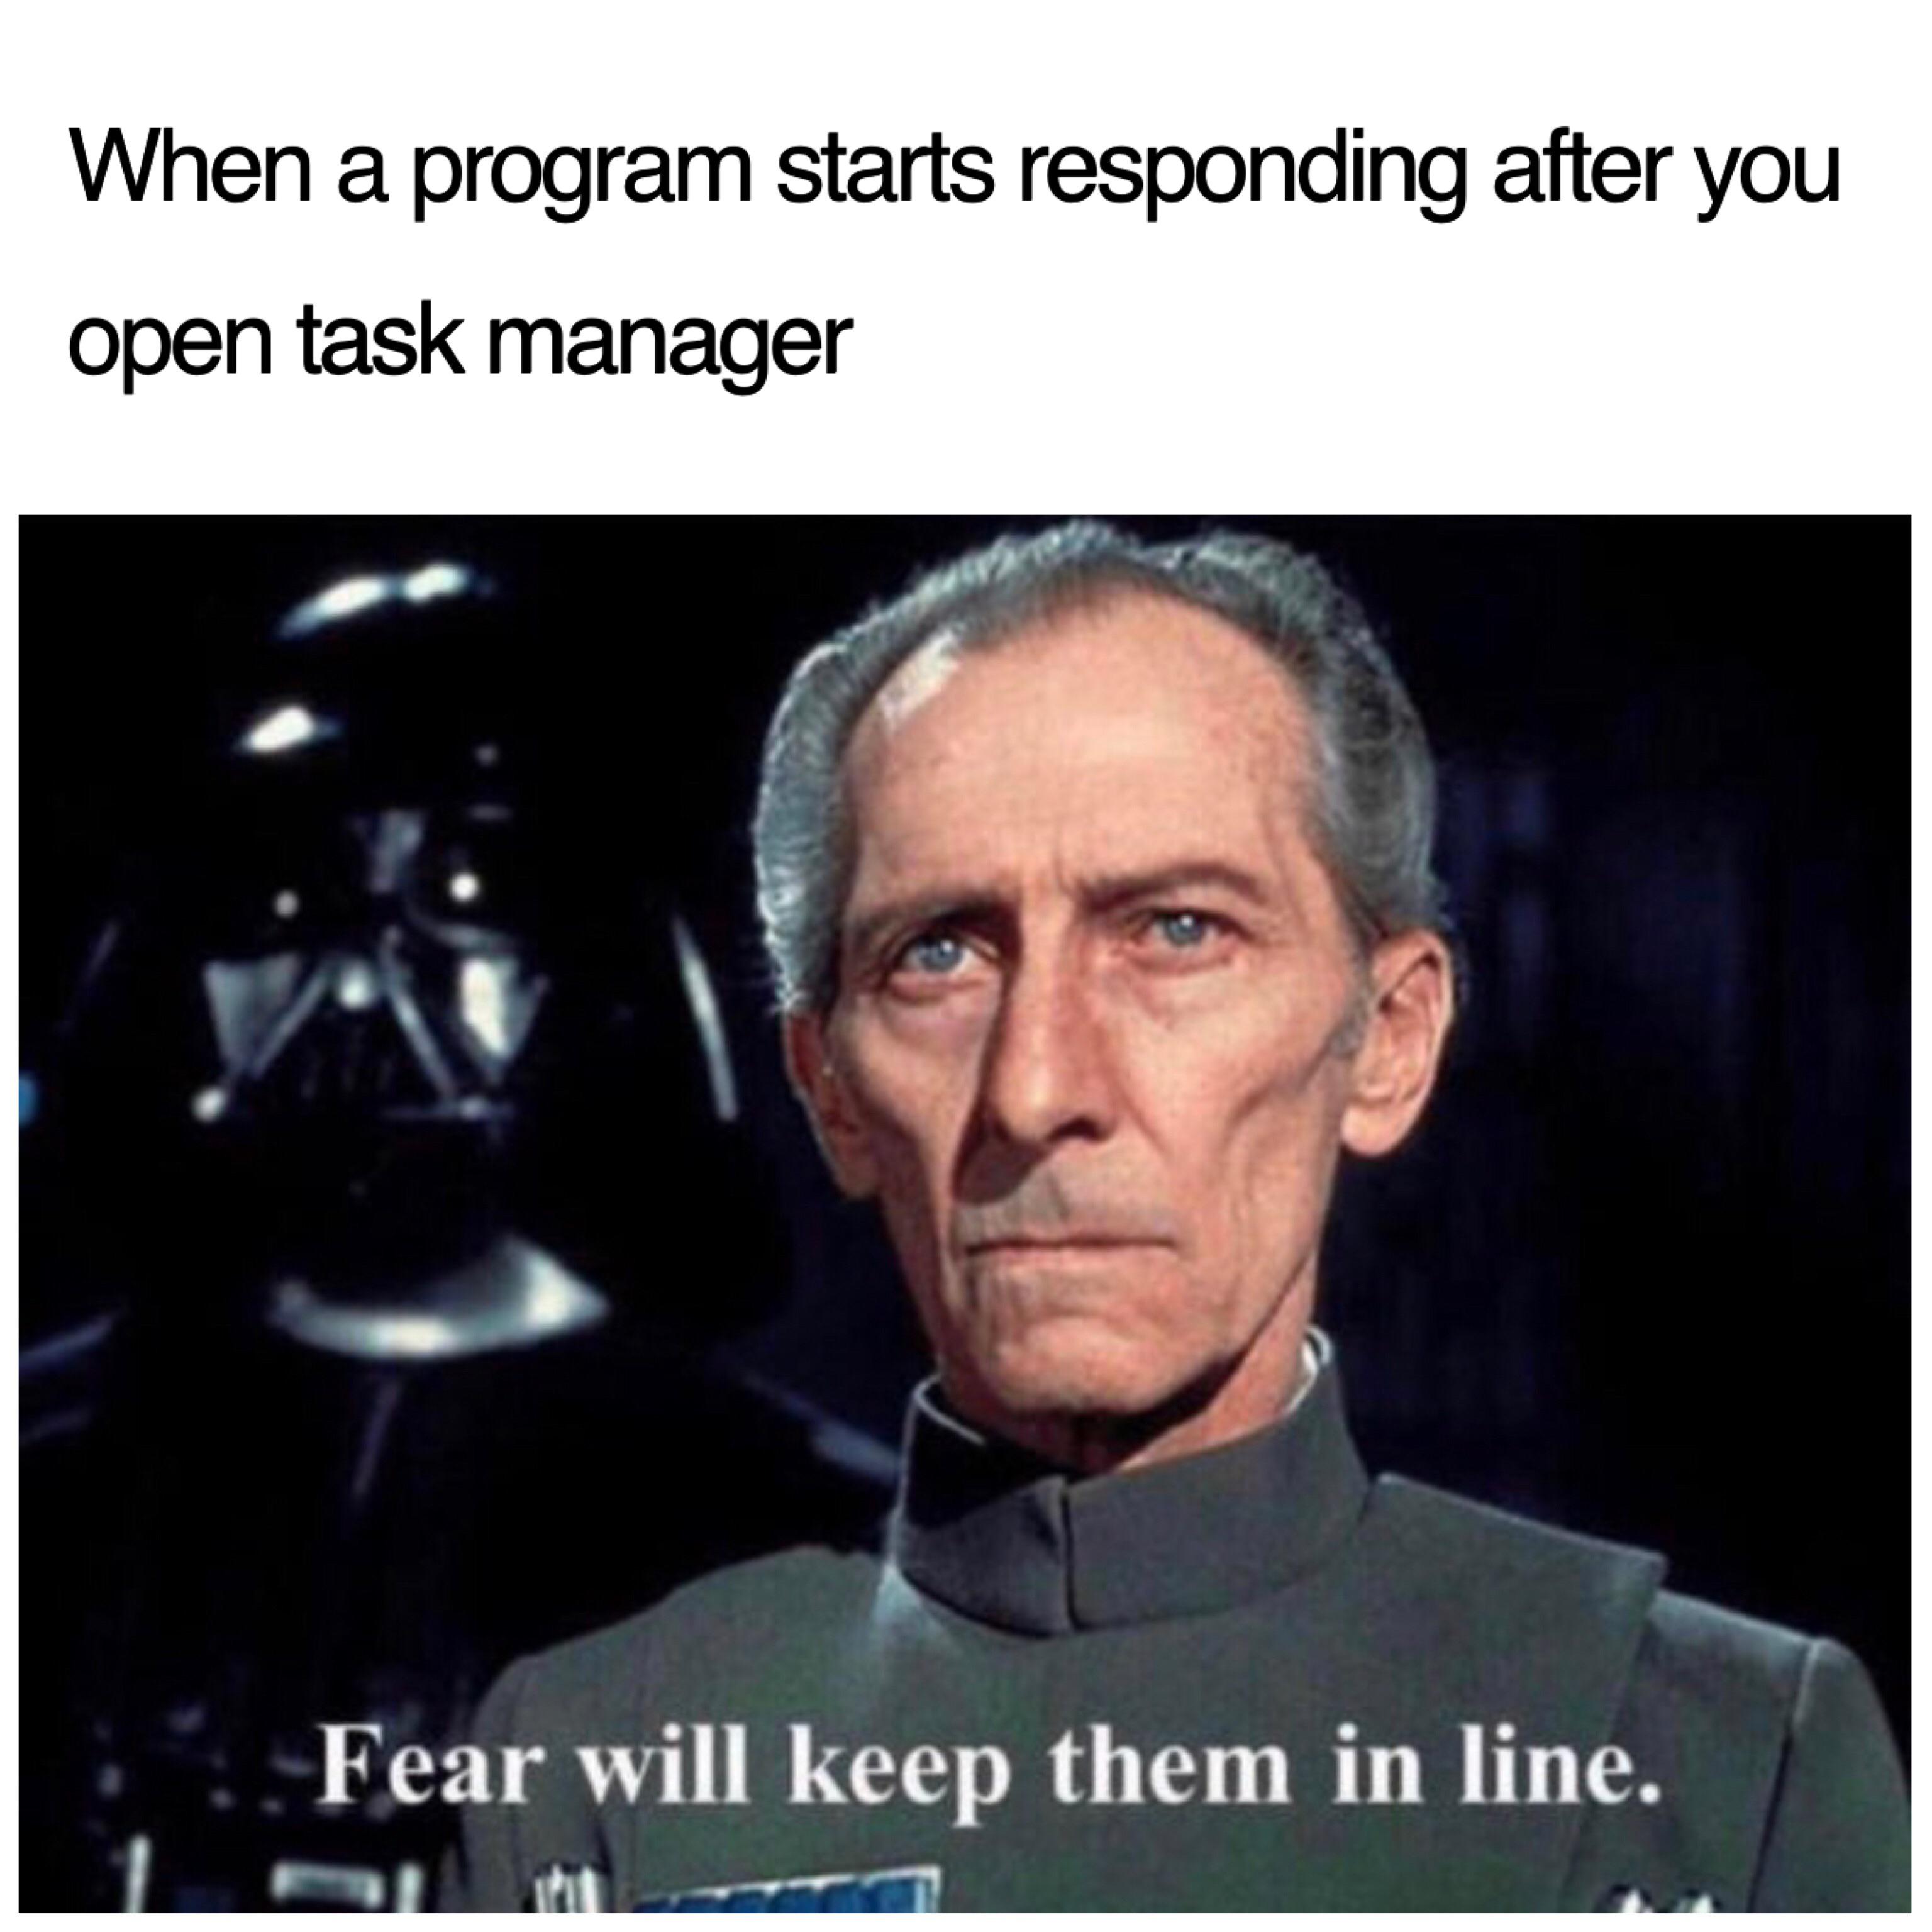 task manager fear will keep them in line - a When a program starts responding after you open task manager Fear will keep them in line.